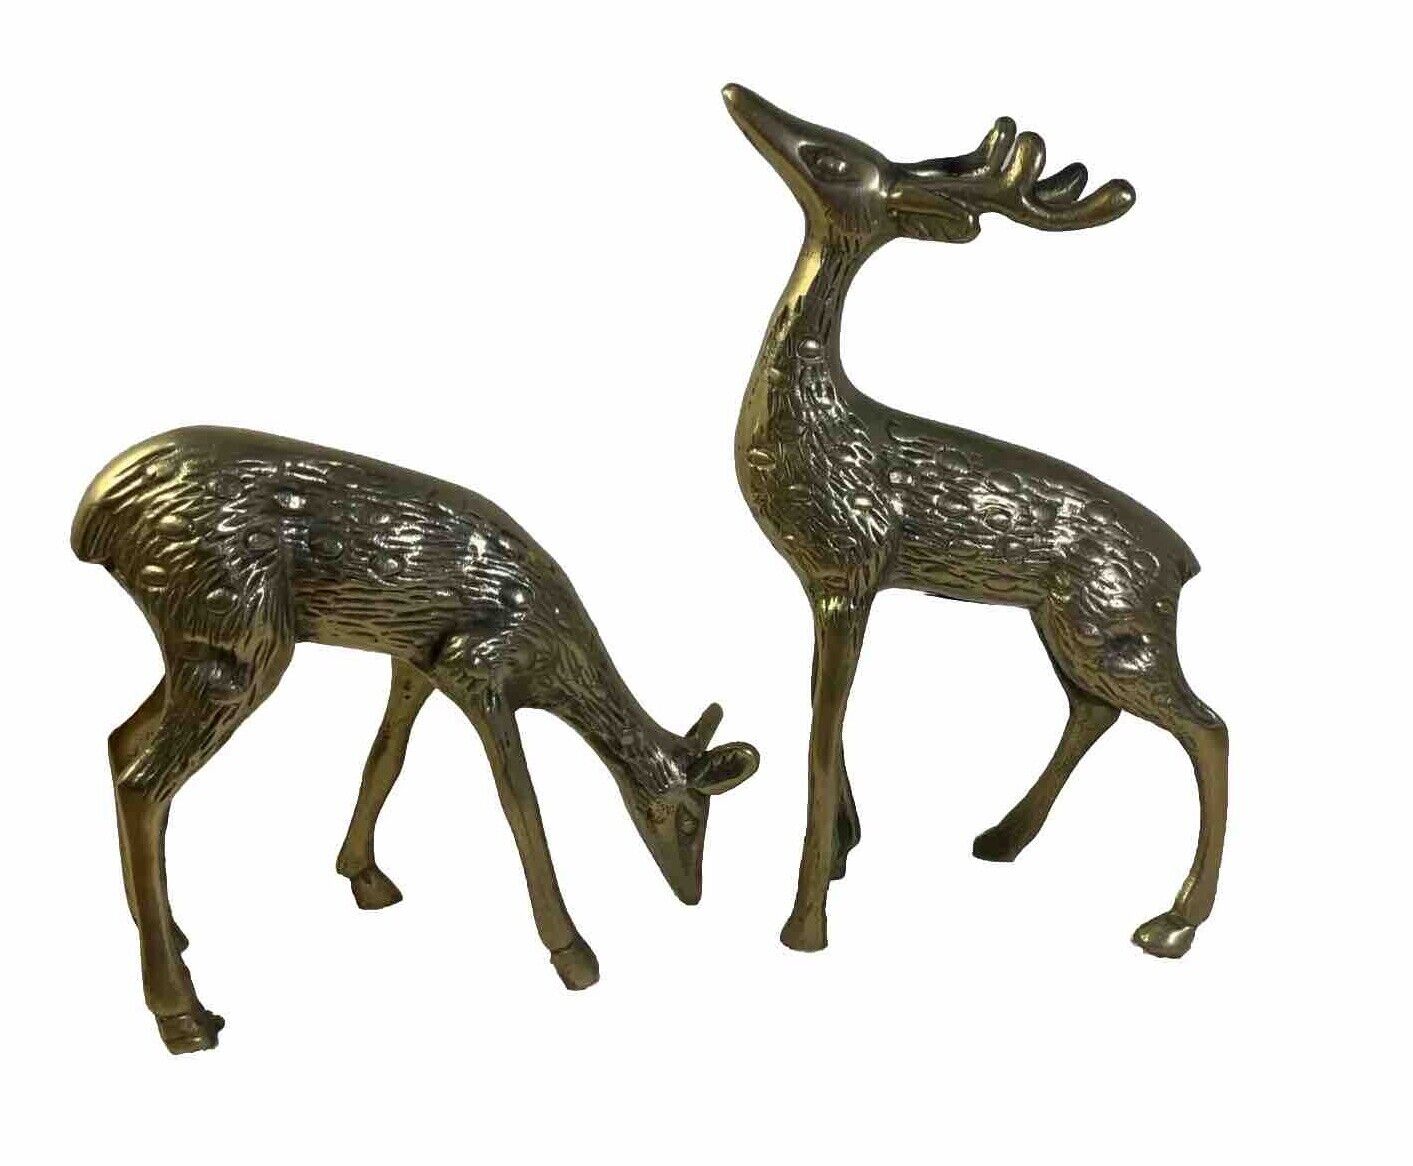 Vintage Brass Buck And Doe Deer Figurines- 6”H And 4 1/2”H- Lot Of 2